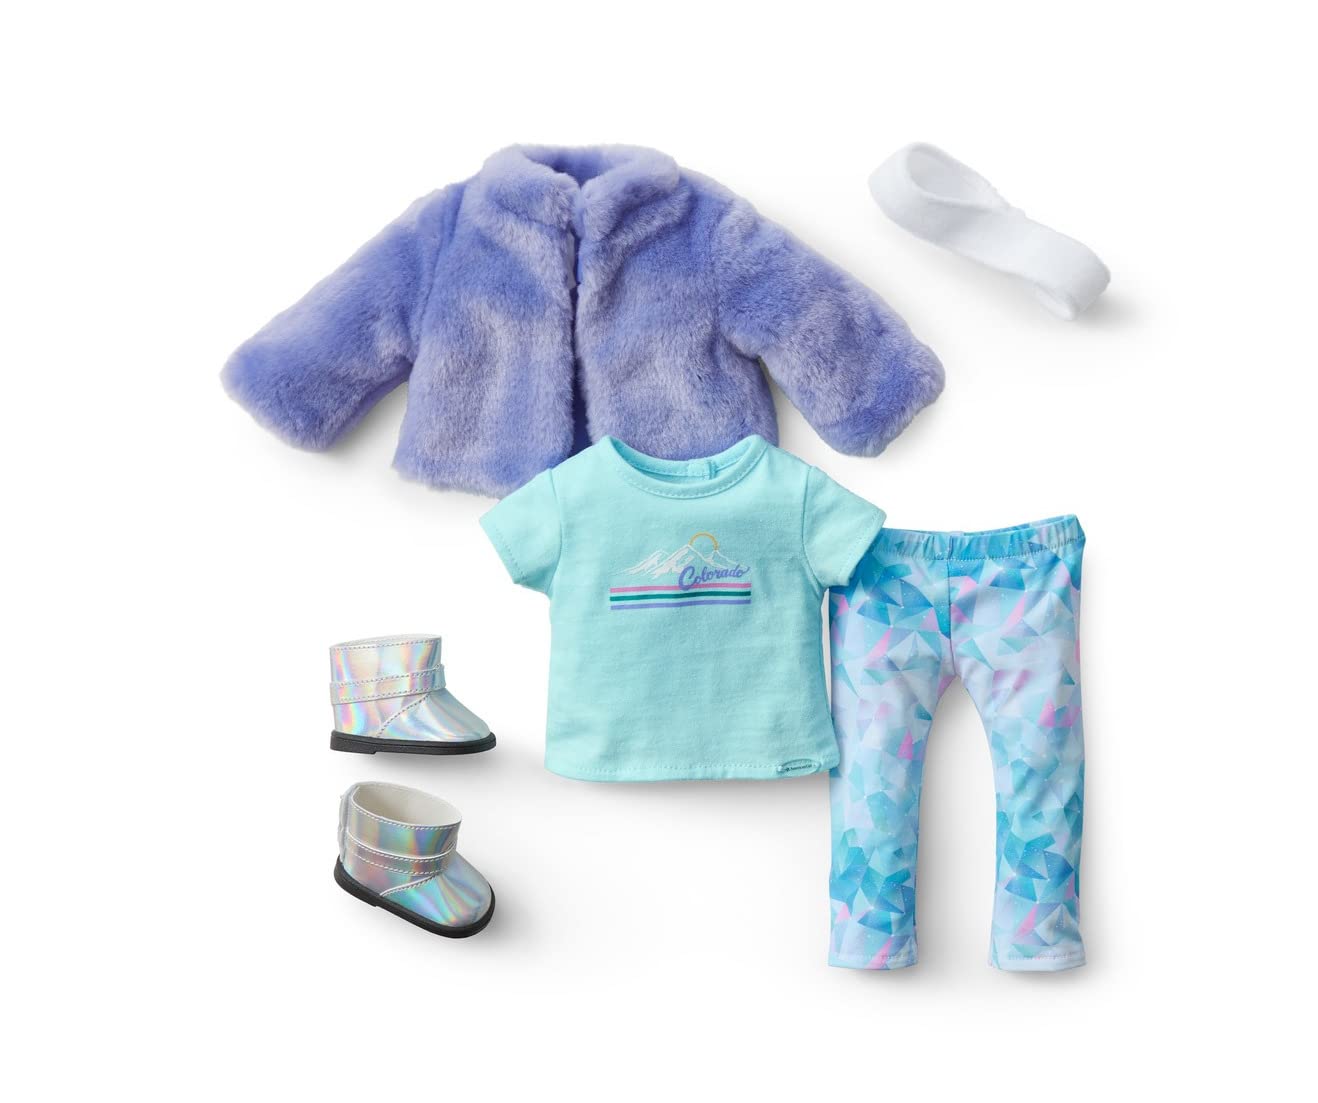 American Girl 2022 Girl of The Year Corinne’s Casual Outfit for 18-inch Dolls with a Purple Coat, and a Pale Blue Short-Sleeved tee, a Pair of Multicolored Print Leggings, White Fleece Headband